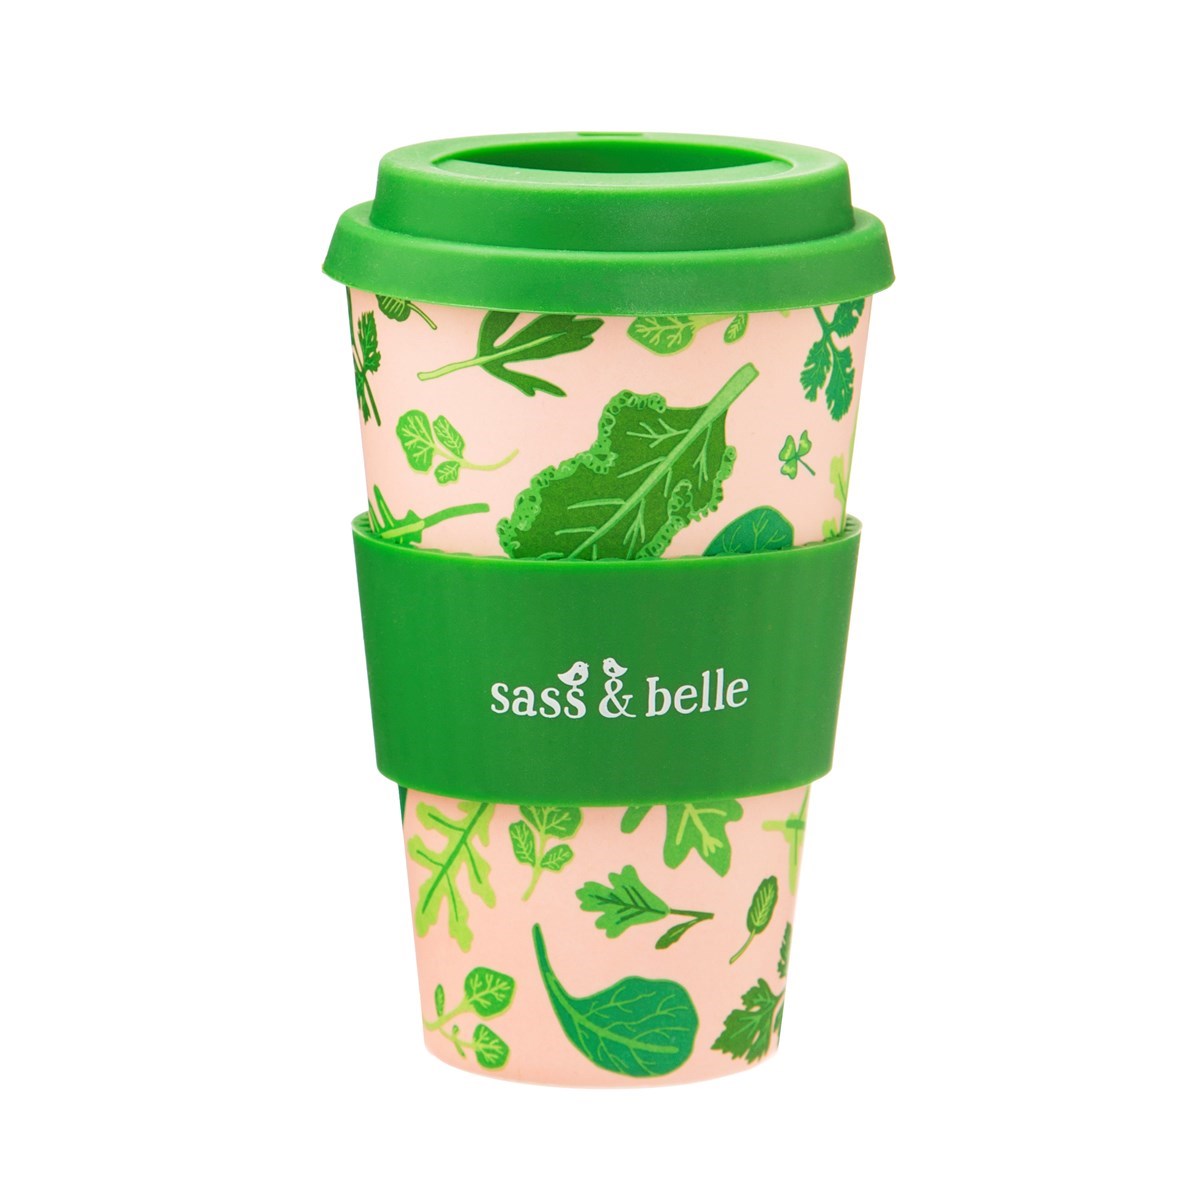 https://www.sassandbelle.co.uk/Images/Product/Alternative/xlarge/ZOE071_B_Powered_by_Plants_Bamboo_Coffee_Cup.jpg